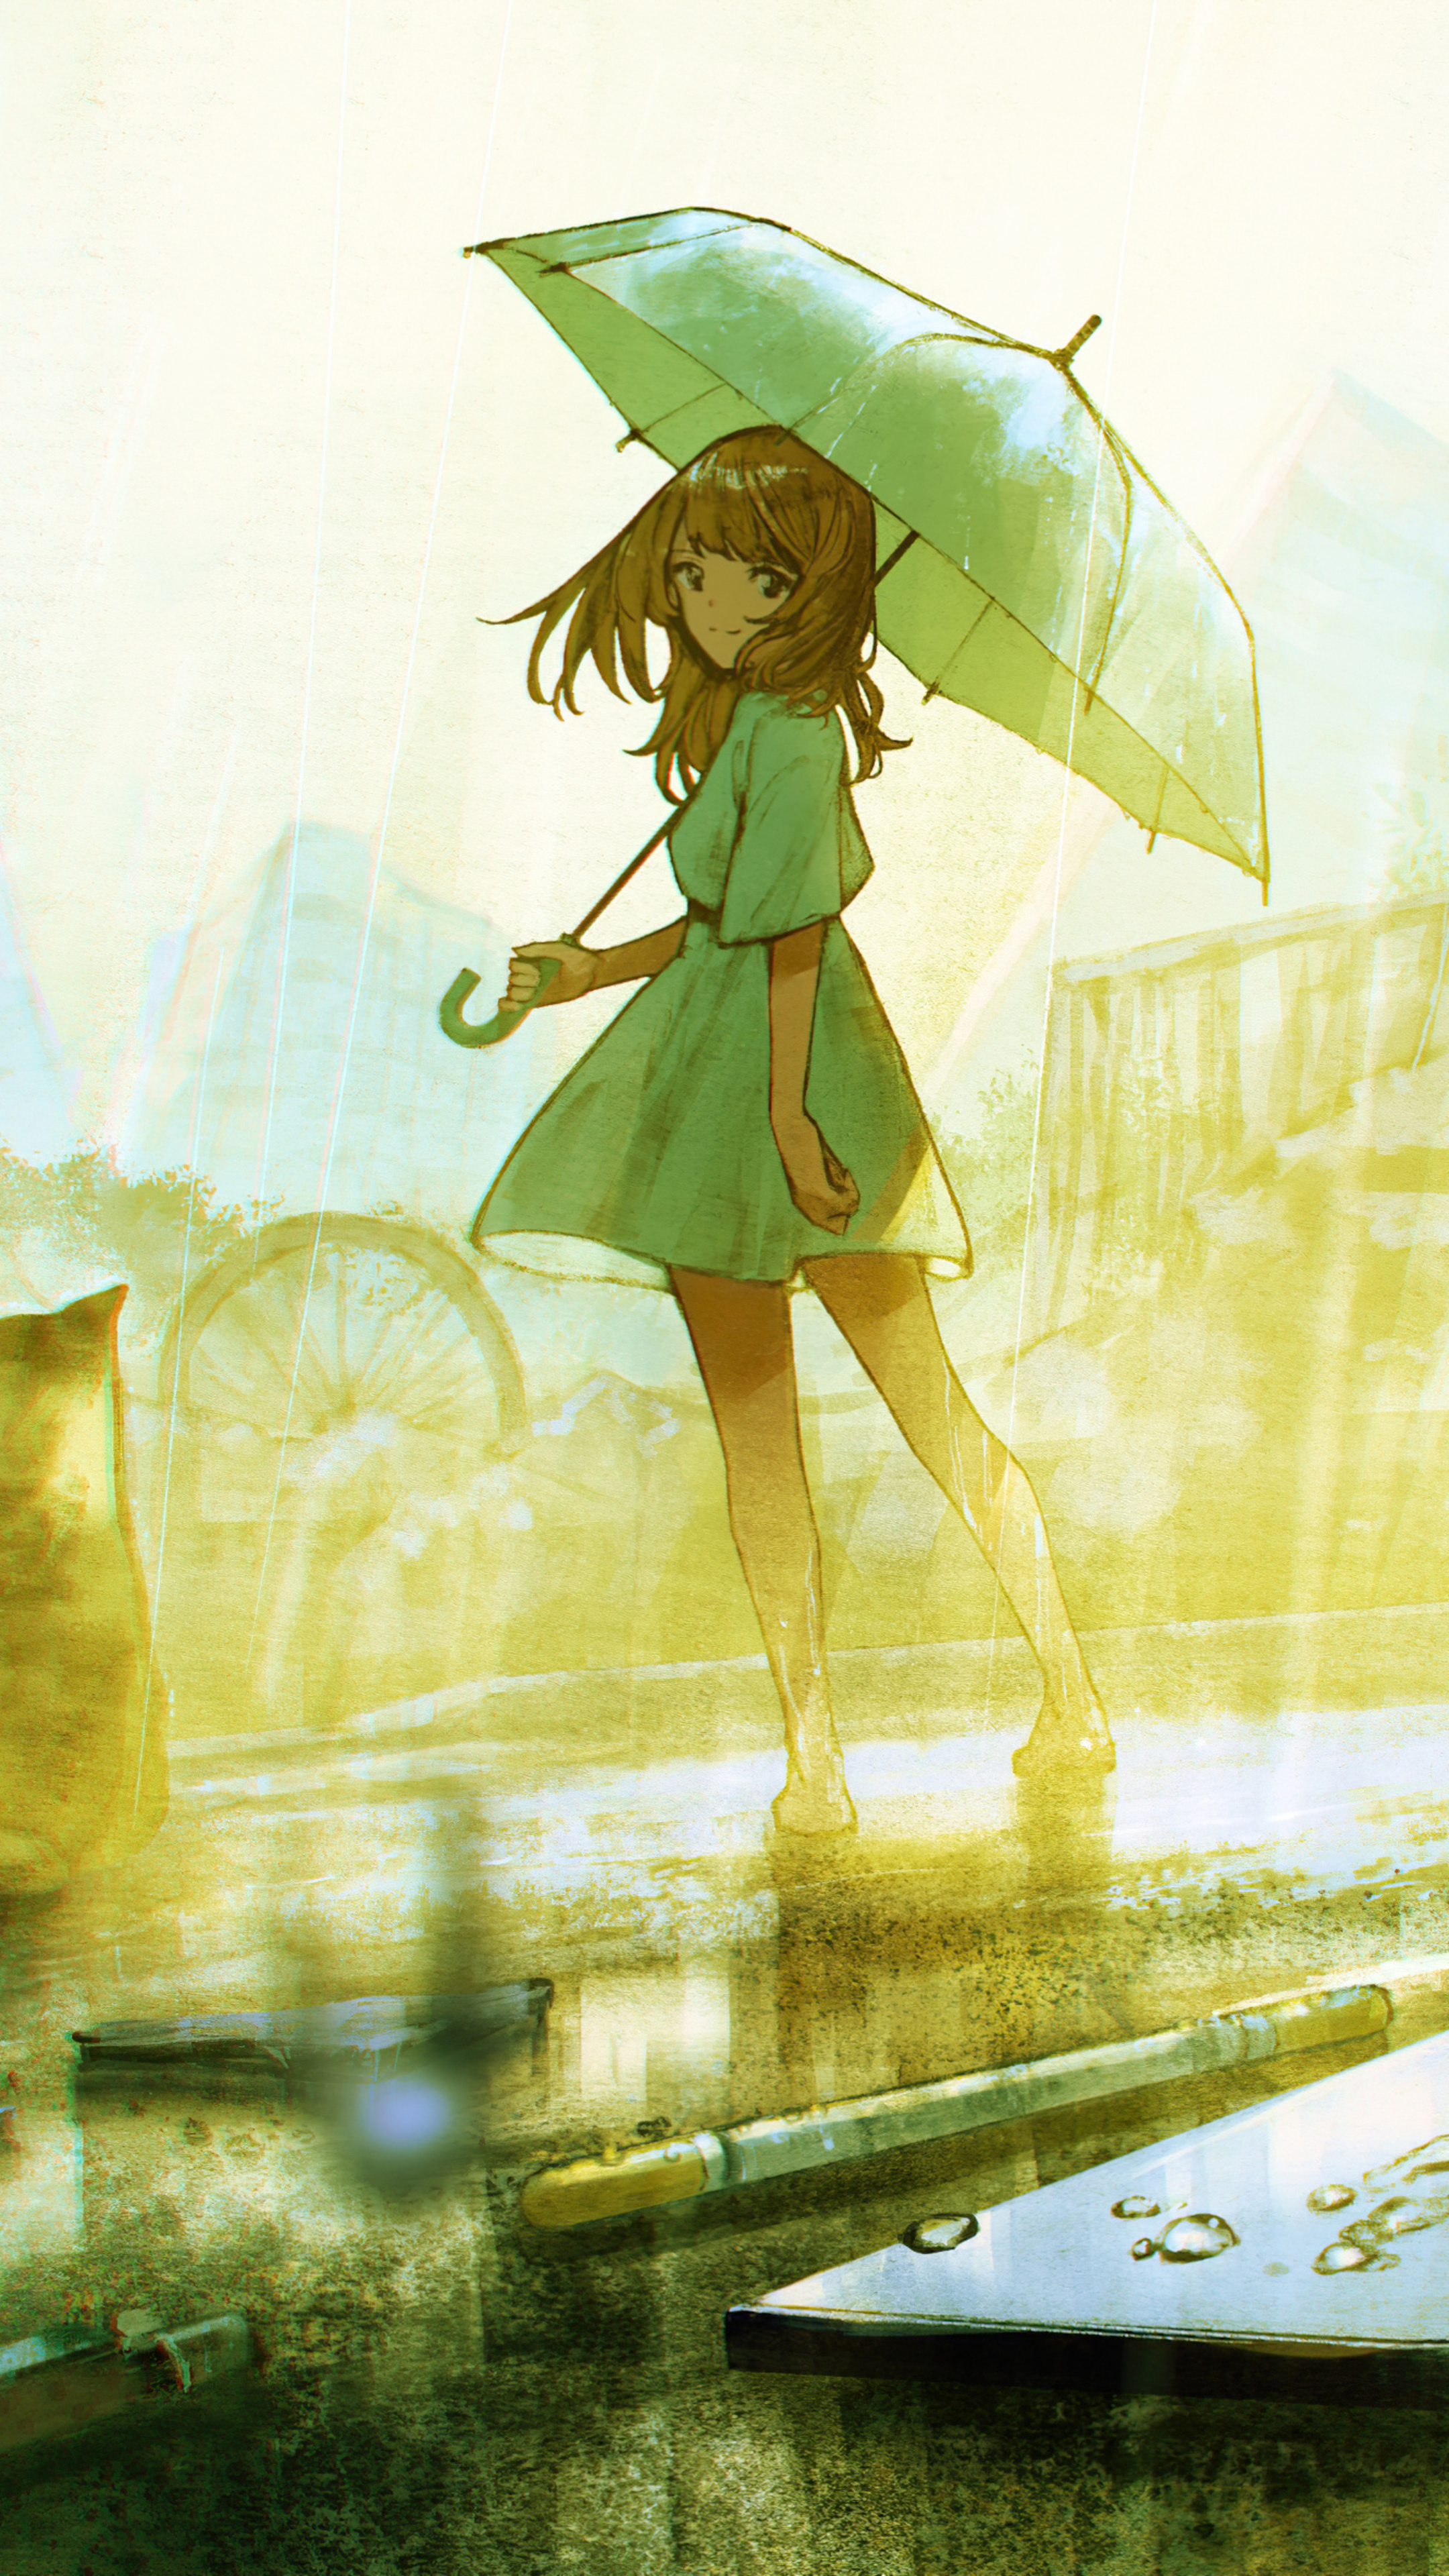 2160x3840 Anime Girl With Umbrella In Rain Sony Xperia X,XZ,Z5 Premium HD  4k Wallpapers, Images, Backgrounds, Photos and Pictures